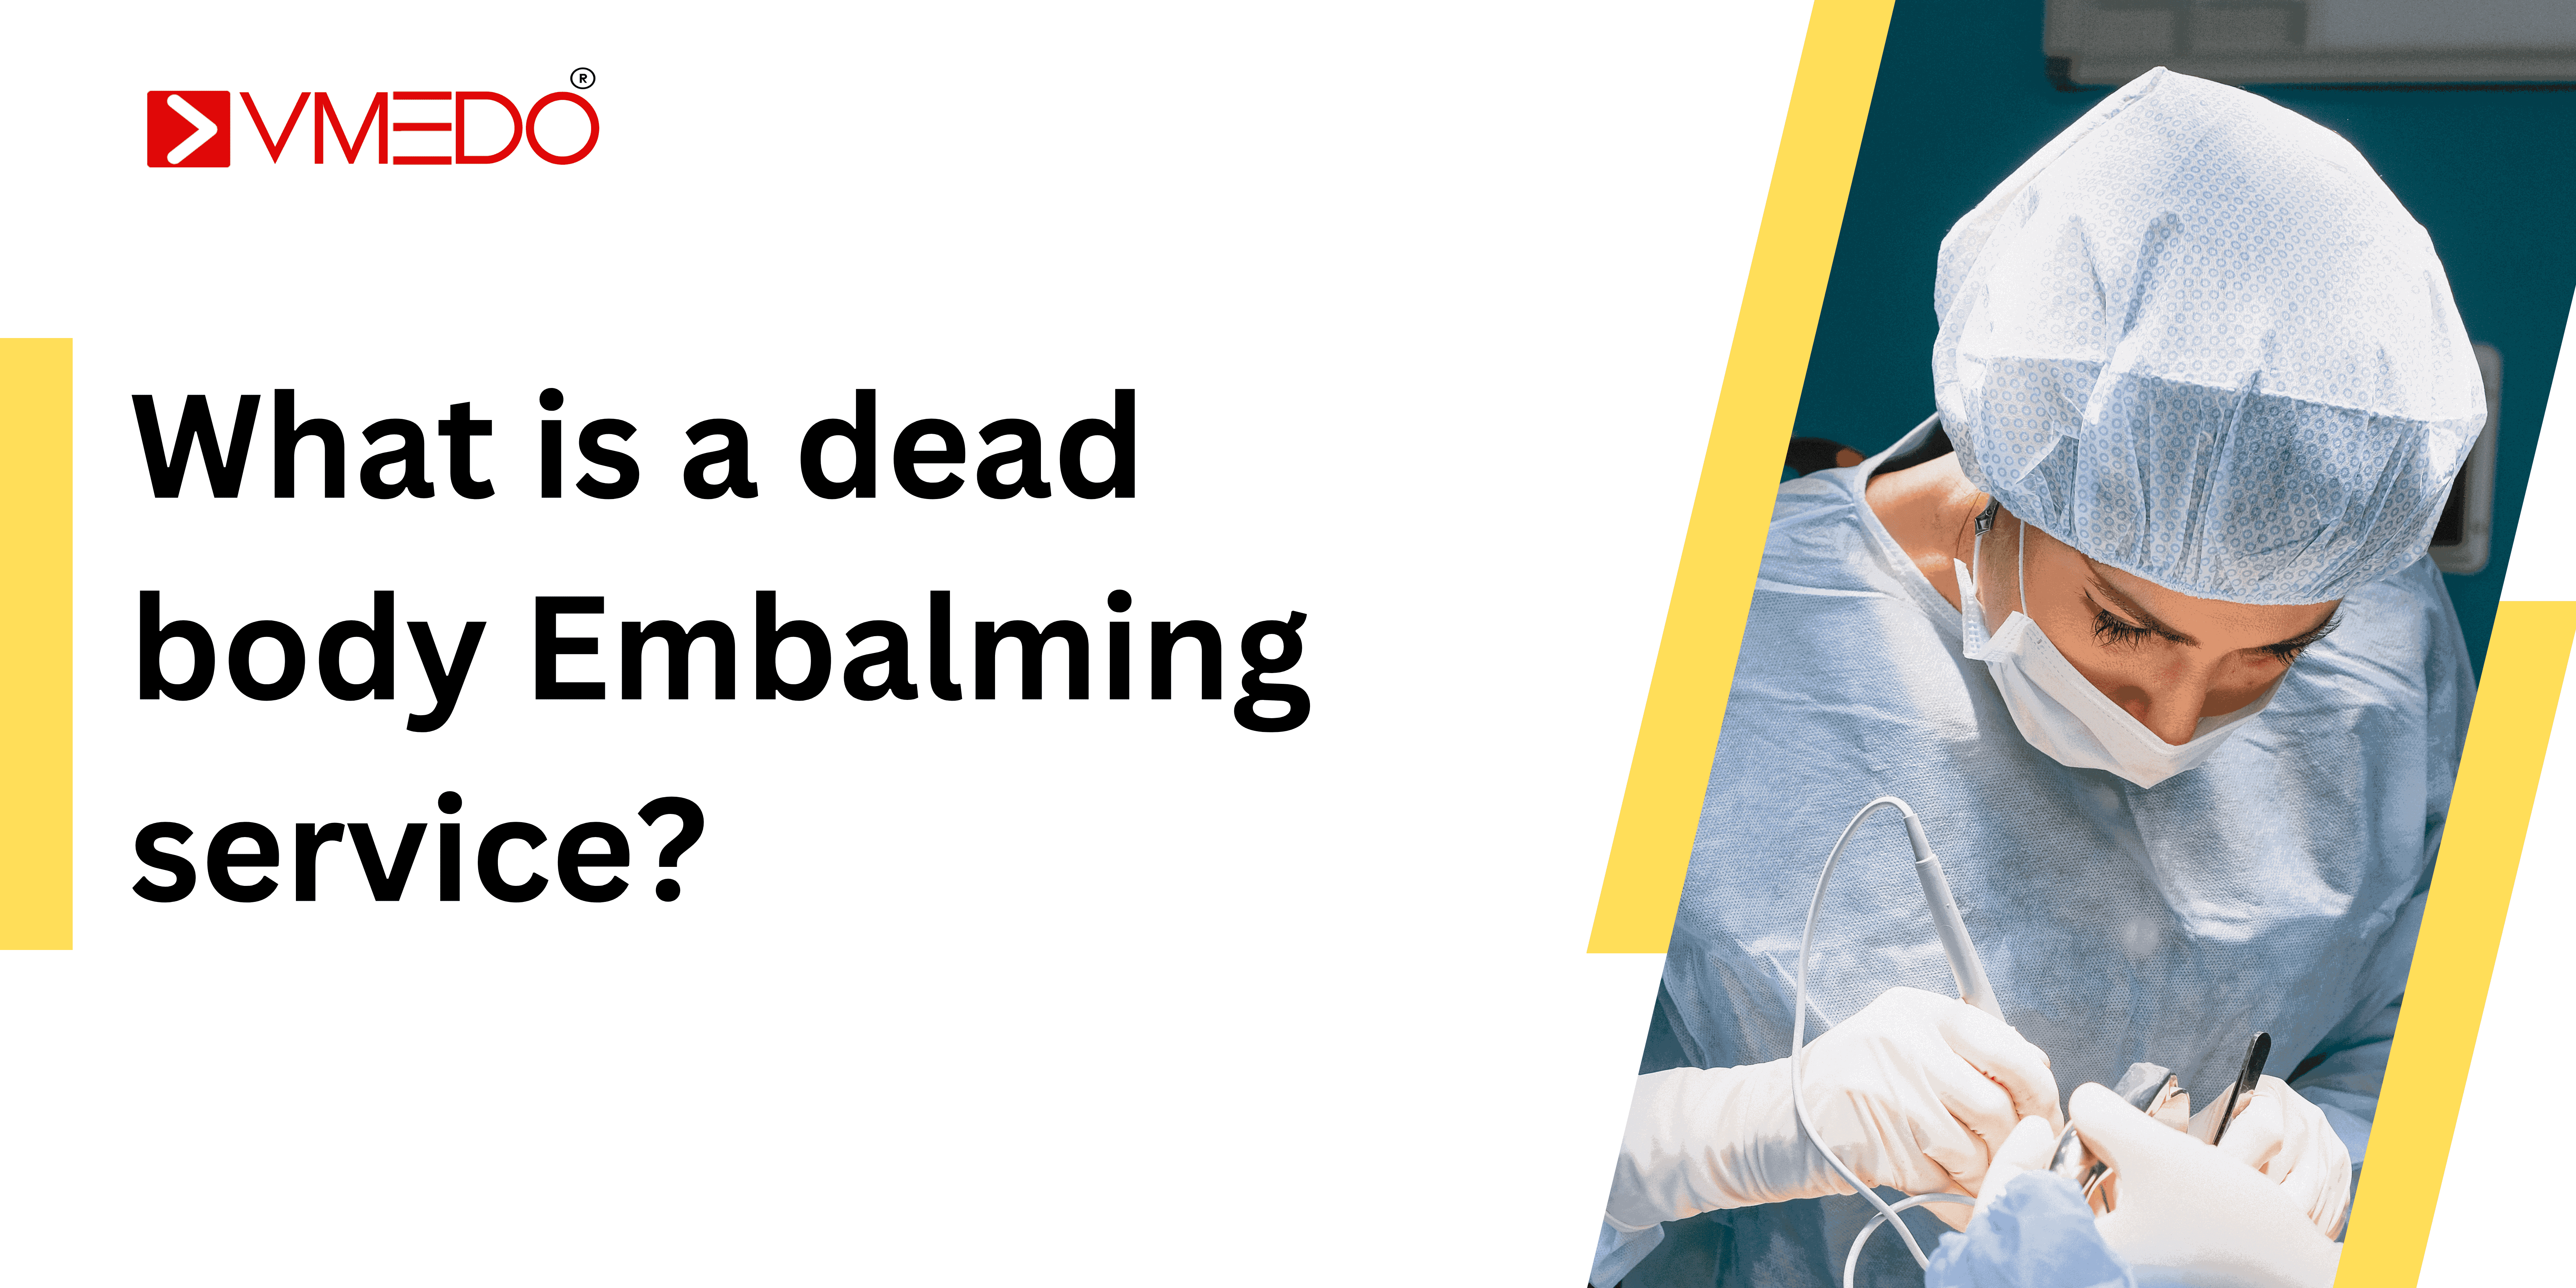 What is dead body embalming services